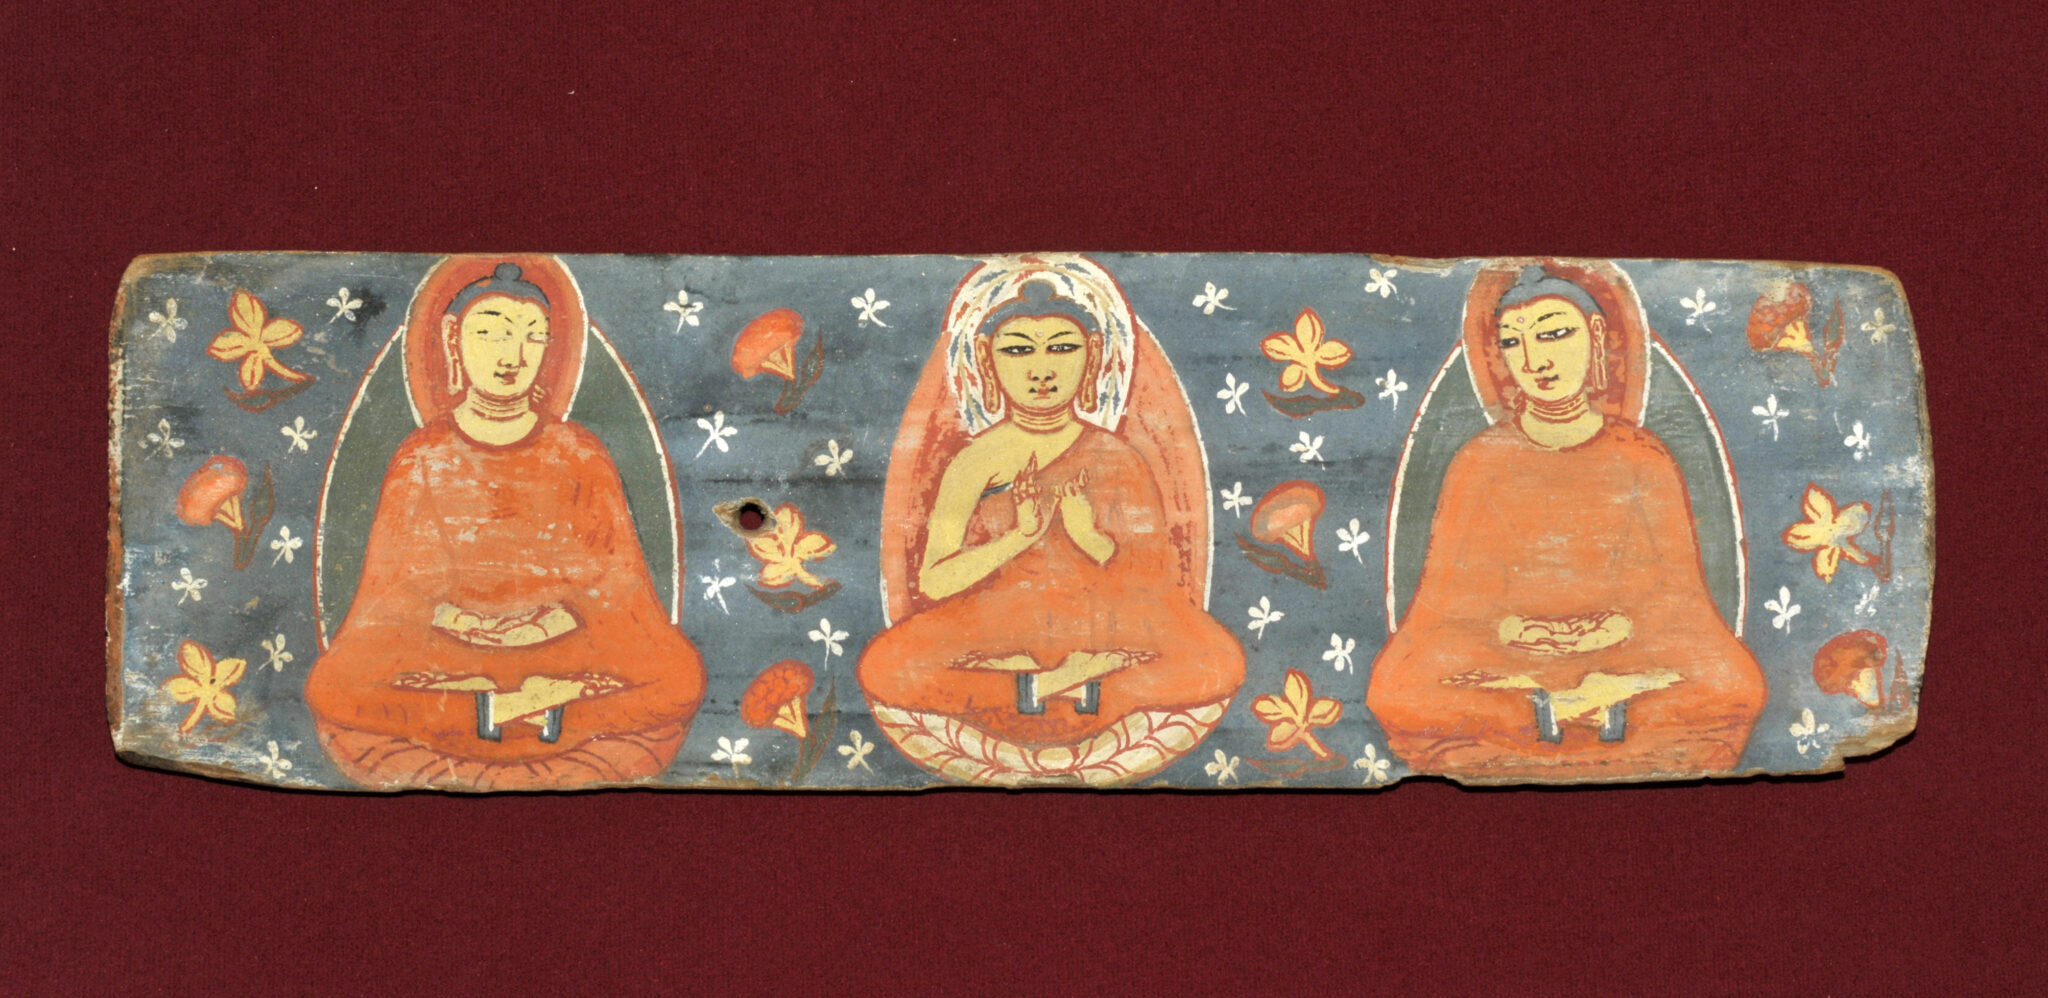 Painting on rectangular panel of two Bodhisattvas facing two worshippers seated against blue background with floral motif